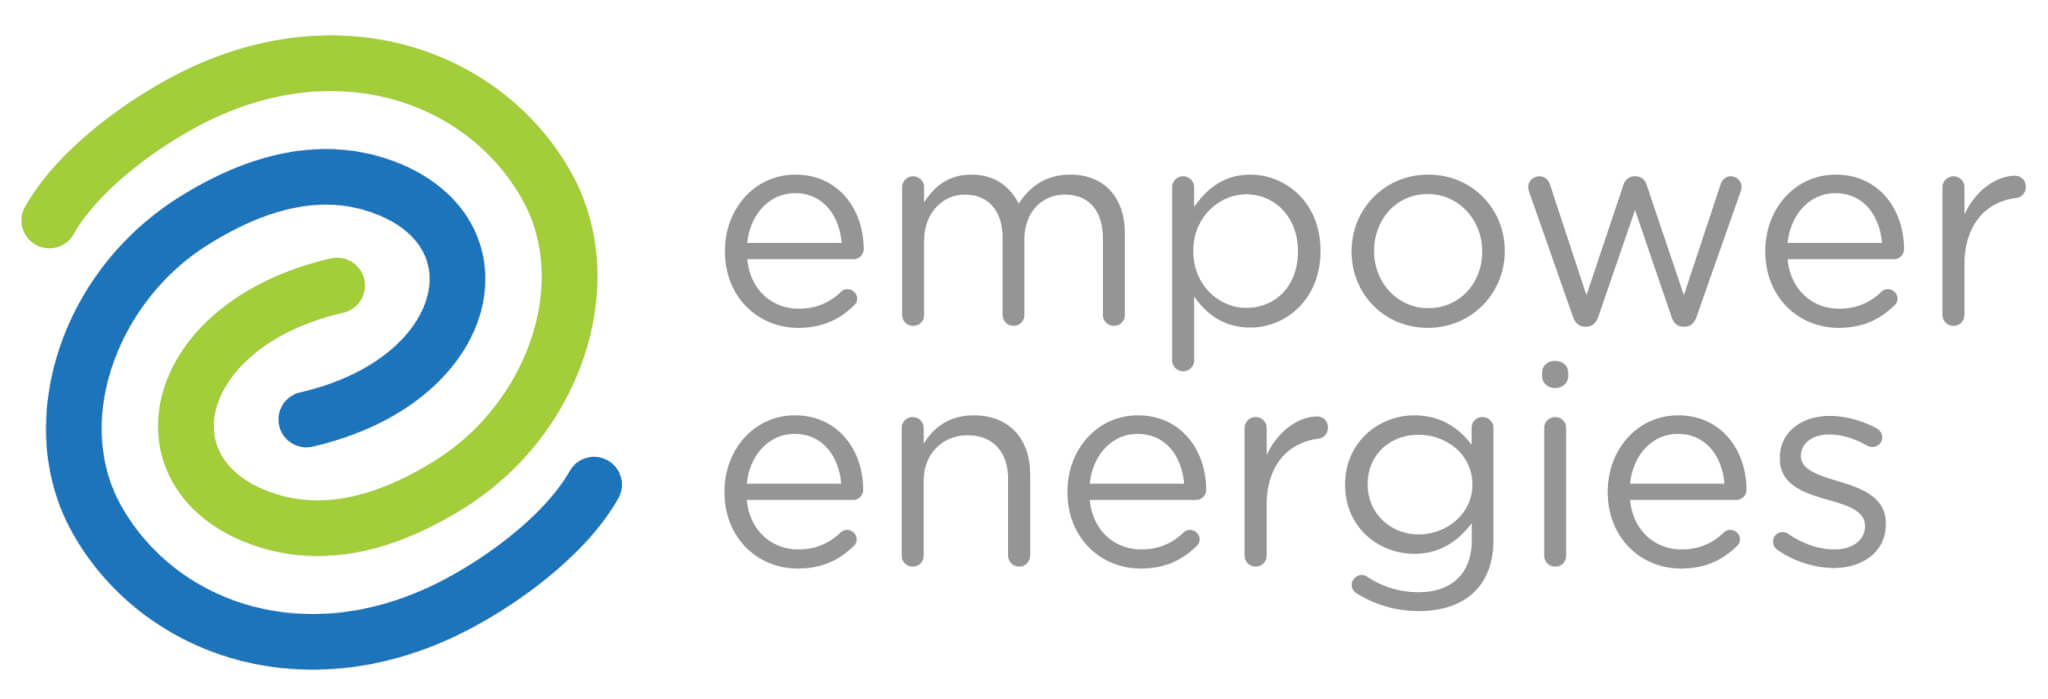 Empower Logo - Empower Energies. Solar Power Financing & Solutions